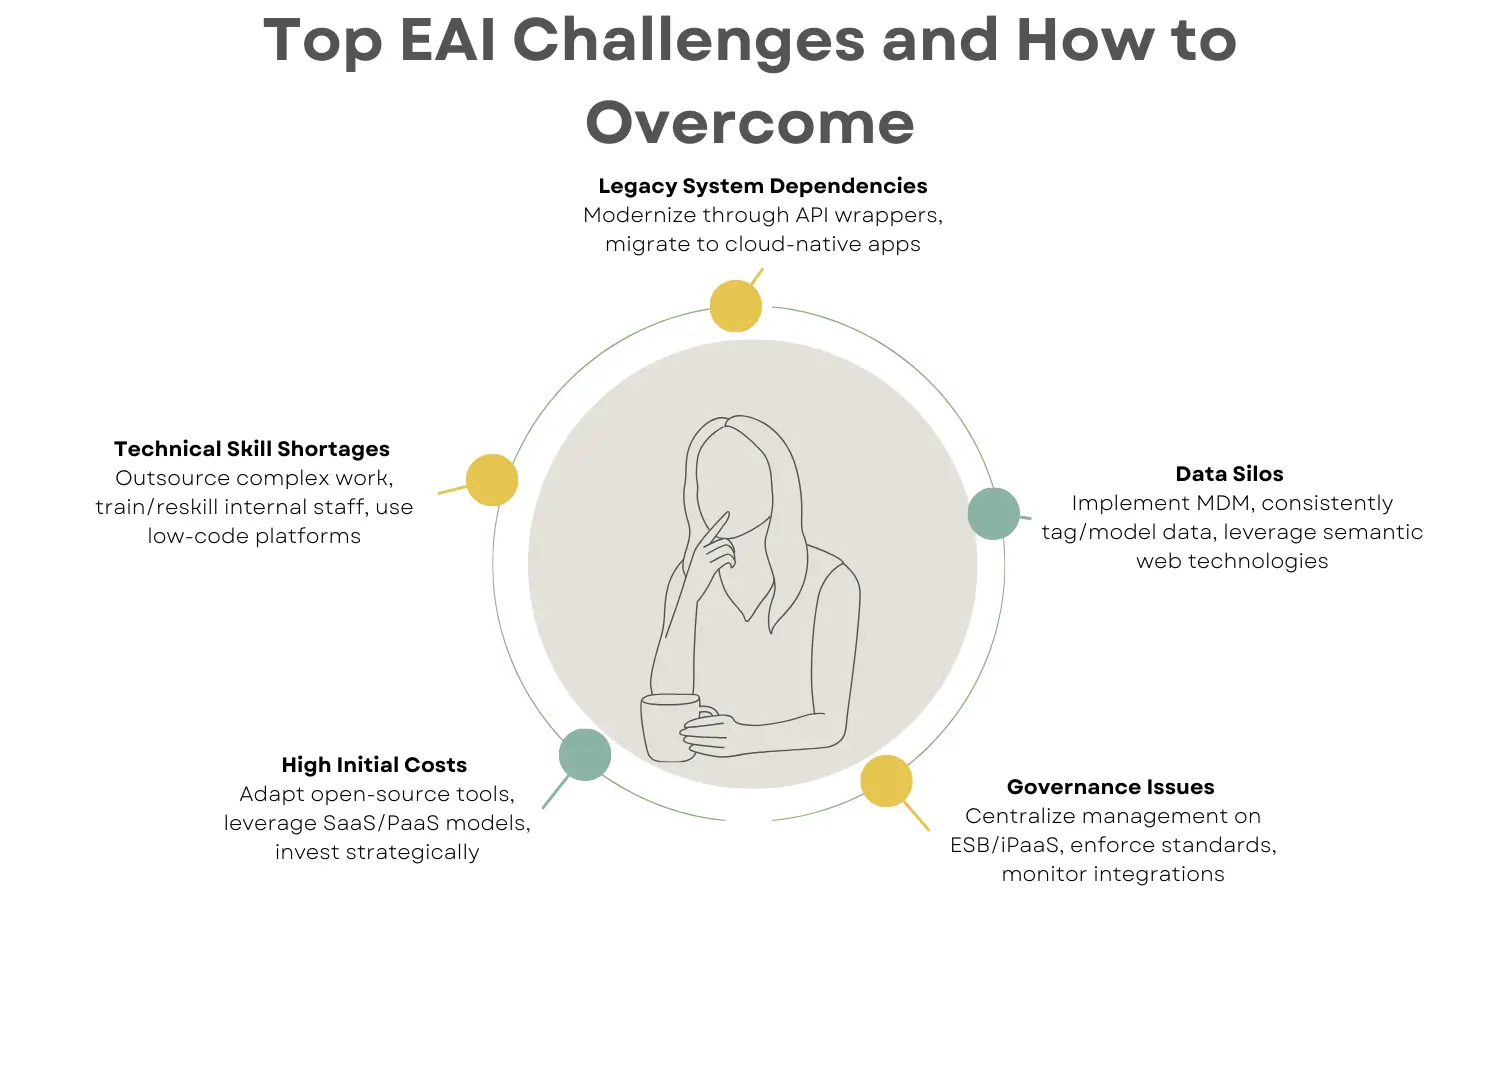 Top EAI Challenges and How to Overcome